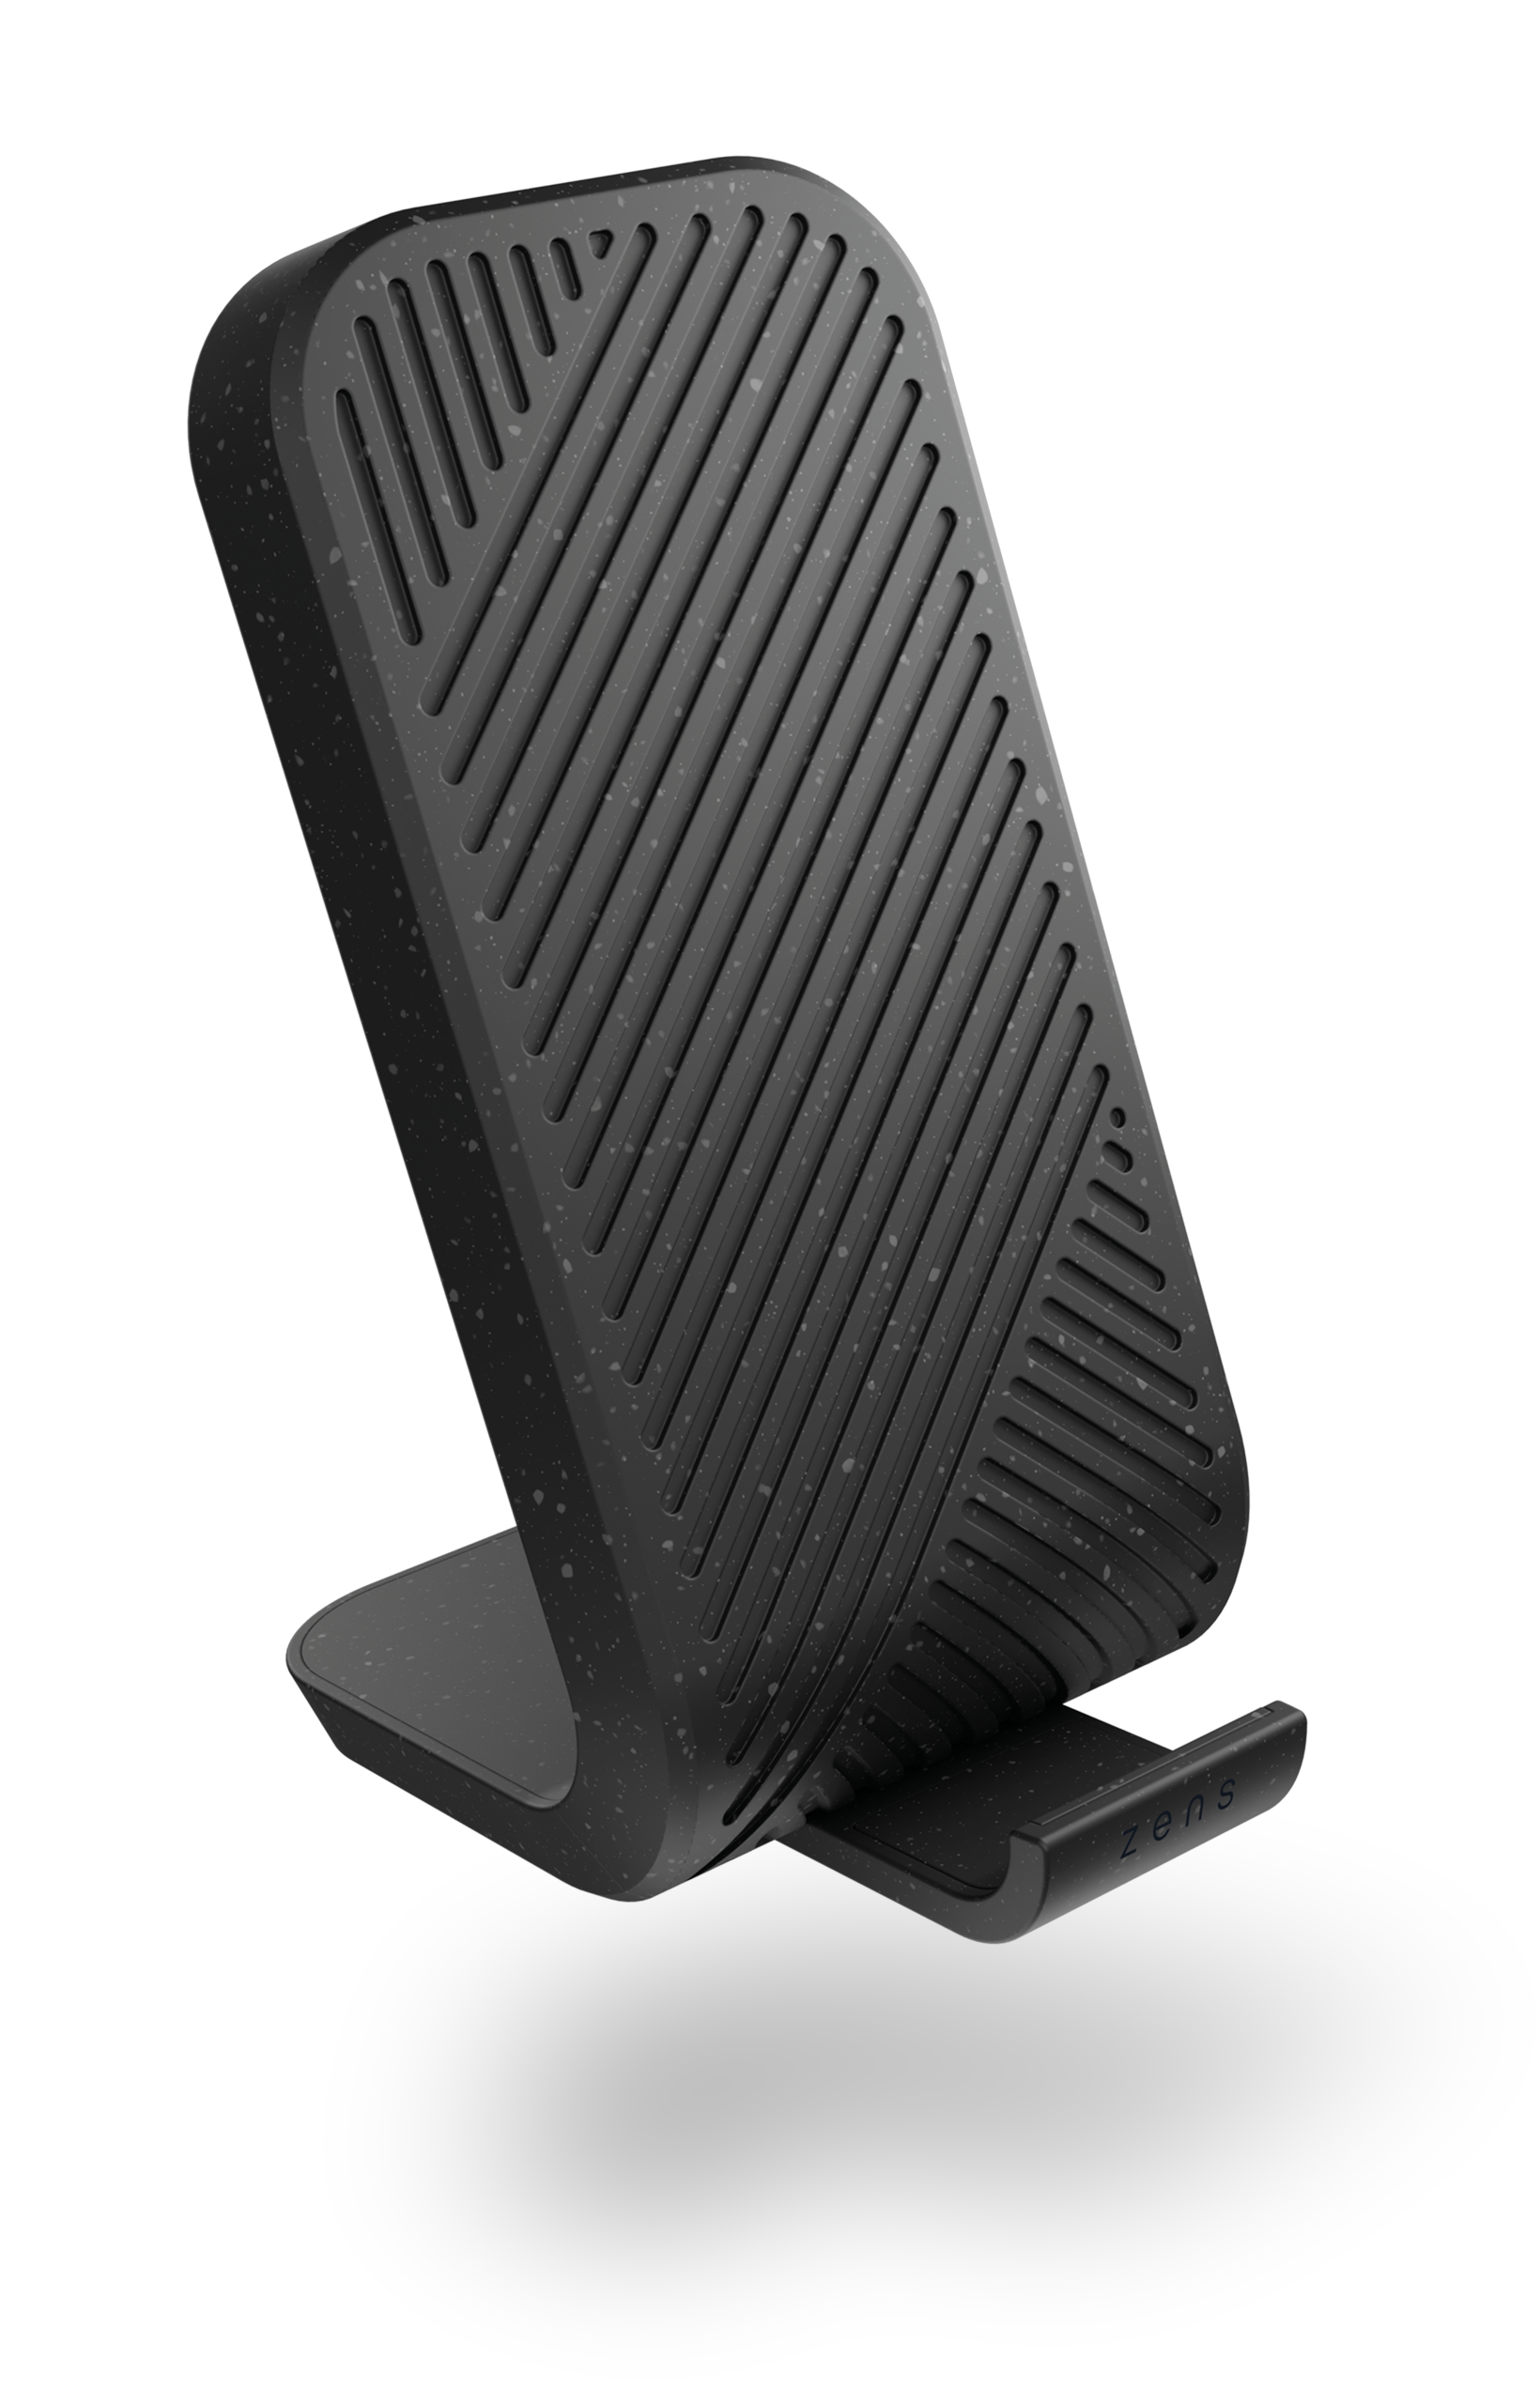 Zens Modular Stand Wireless Charger Main Station - 15W